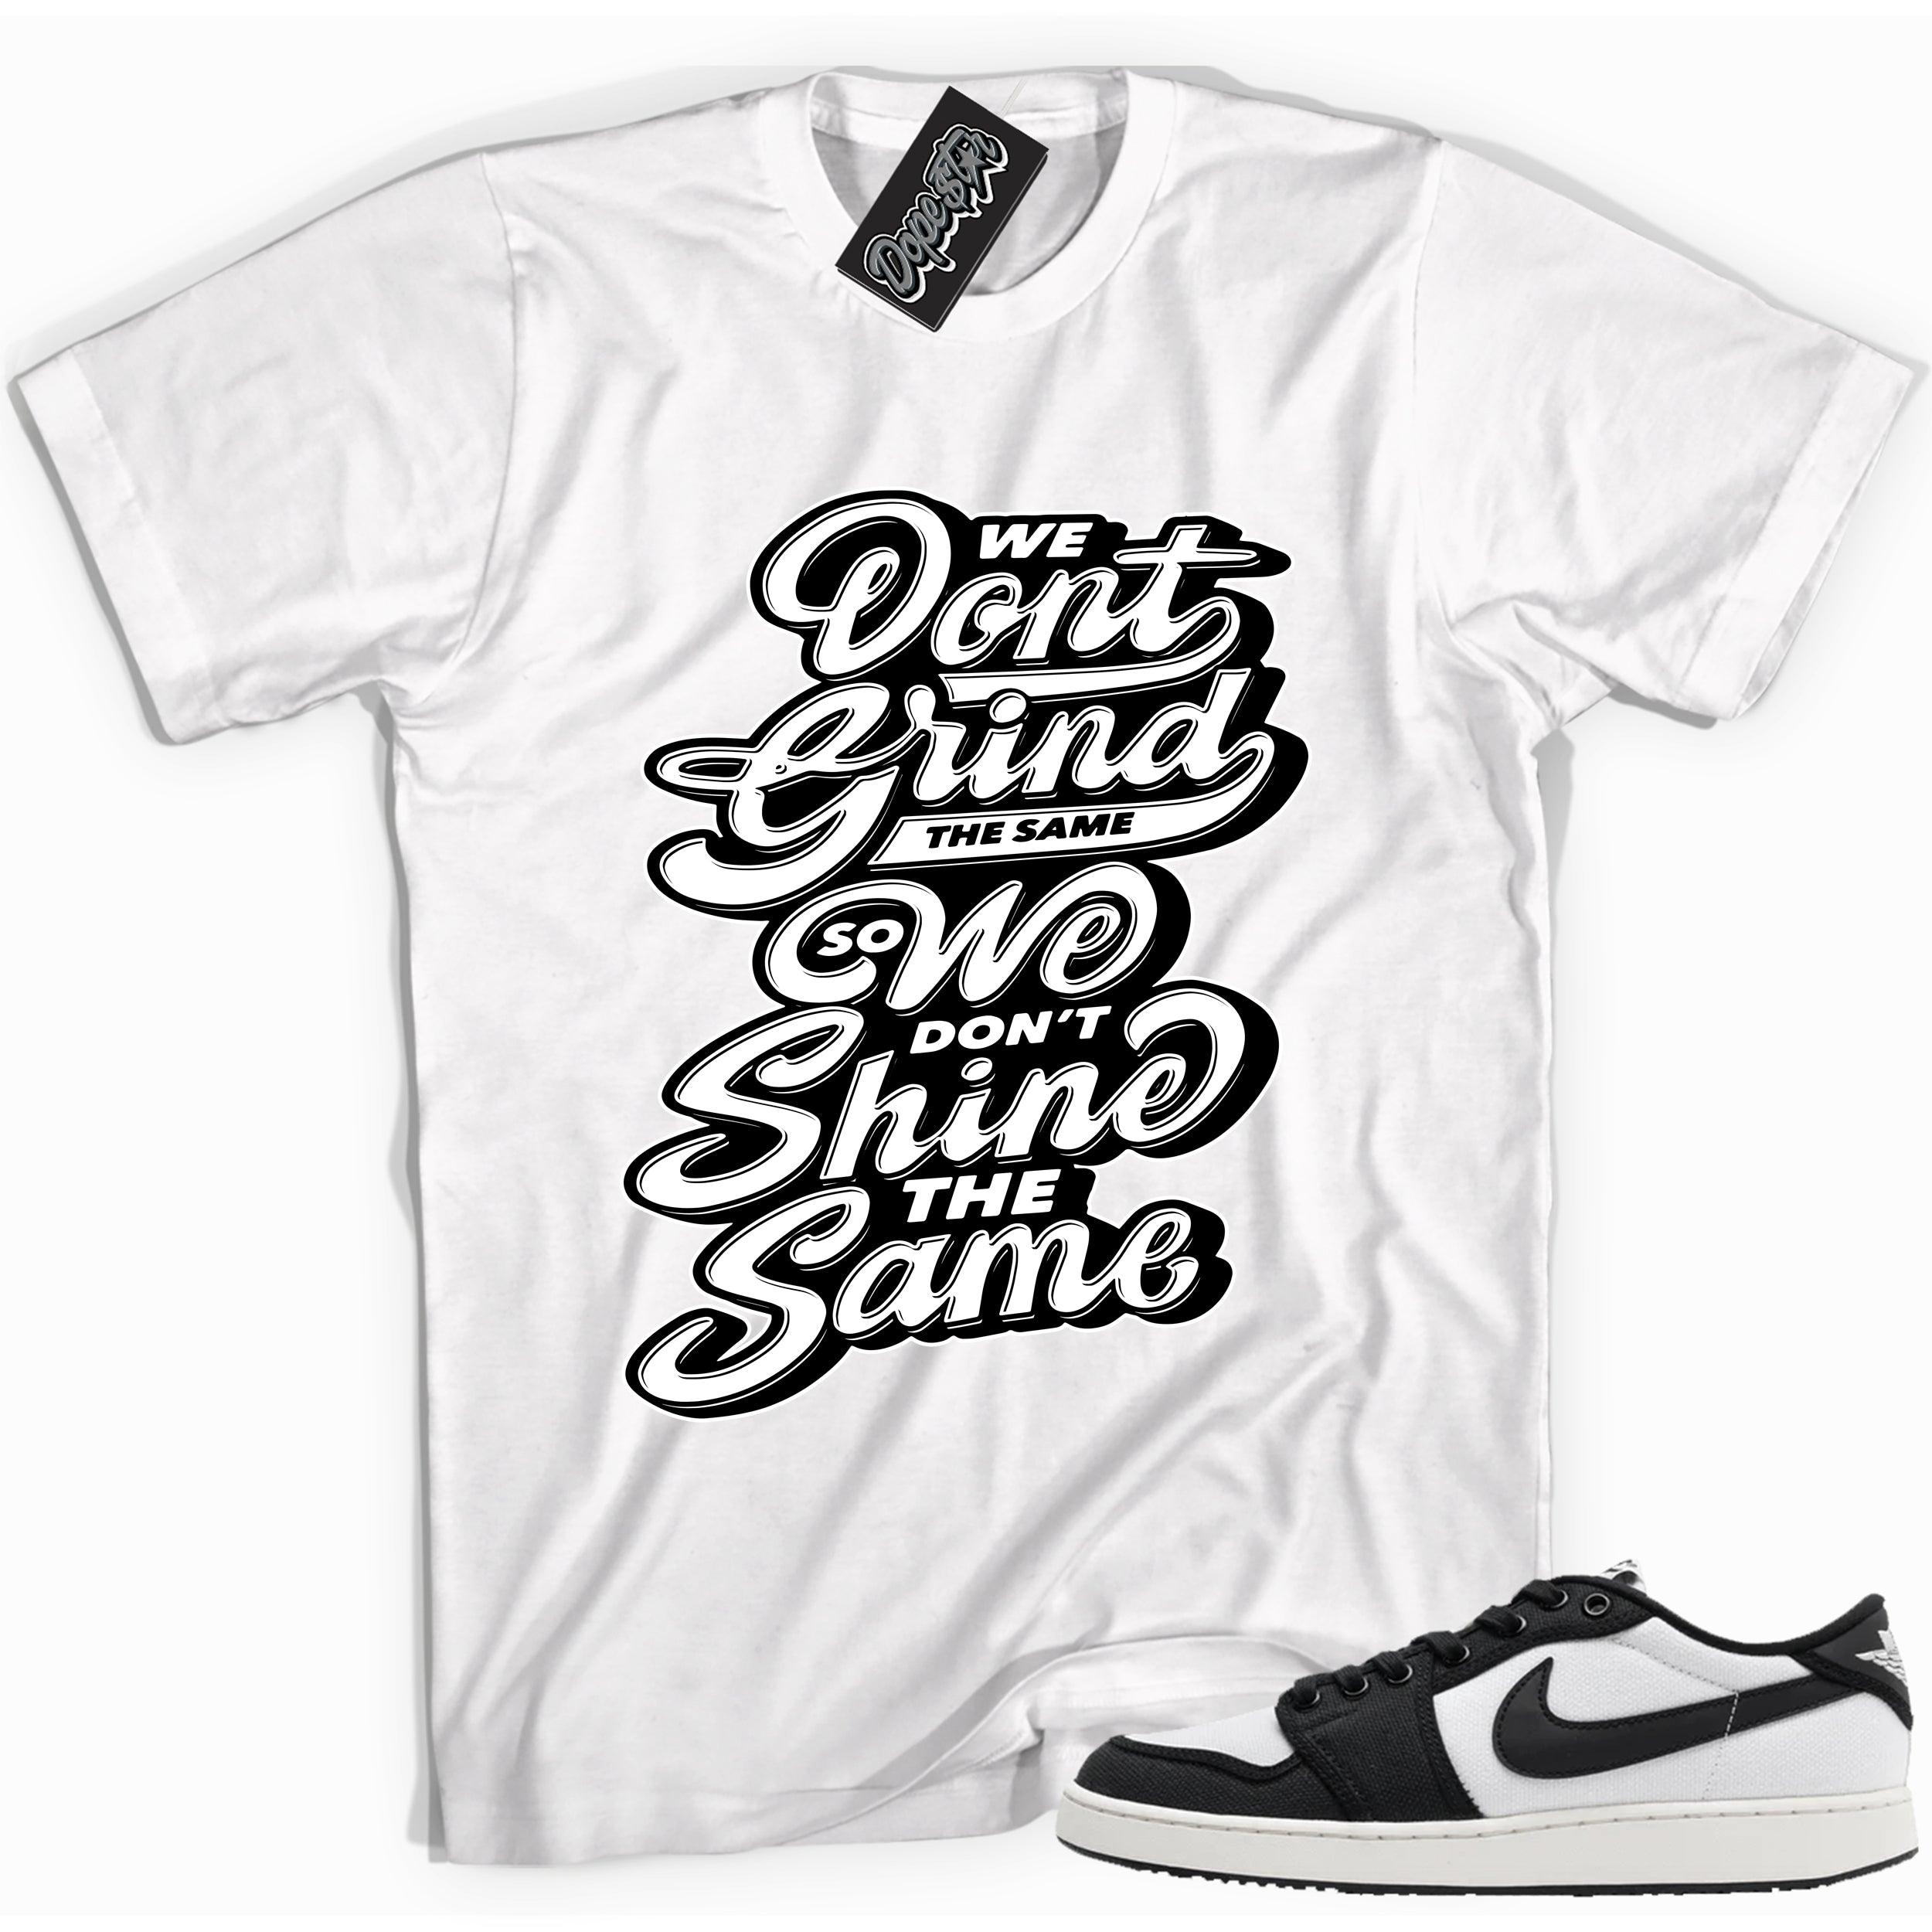 Cool white graphic tee with 'we don't grind the same' print, that perfectly matches Air Jordan 1 Retro Ajko Low Black & White sneakers.